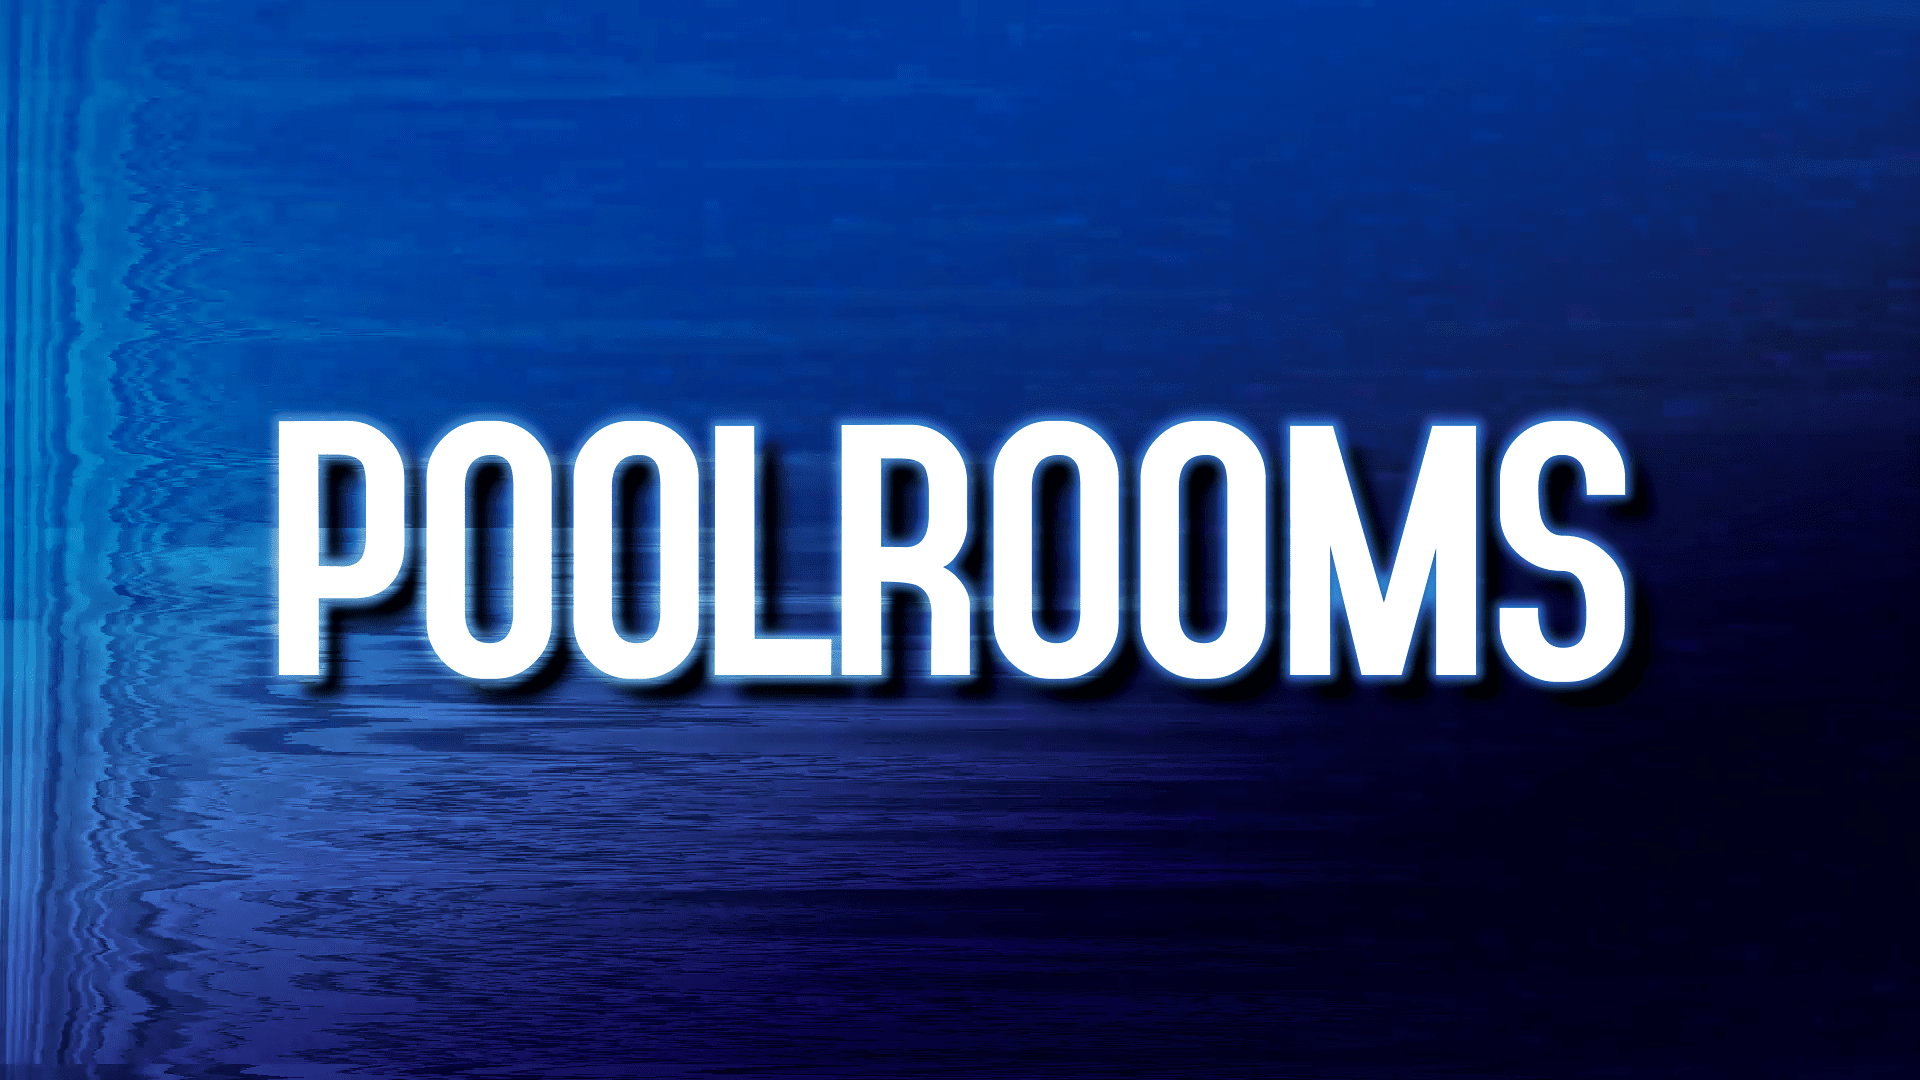 The PoolRooms Experience Windows game - IndieDB